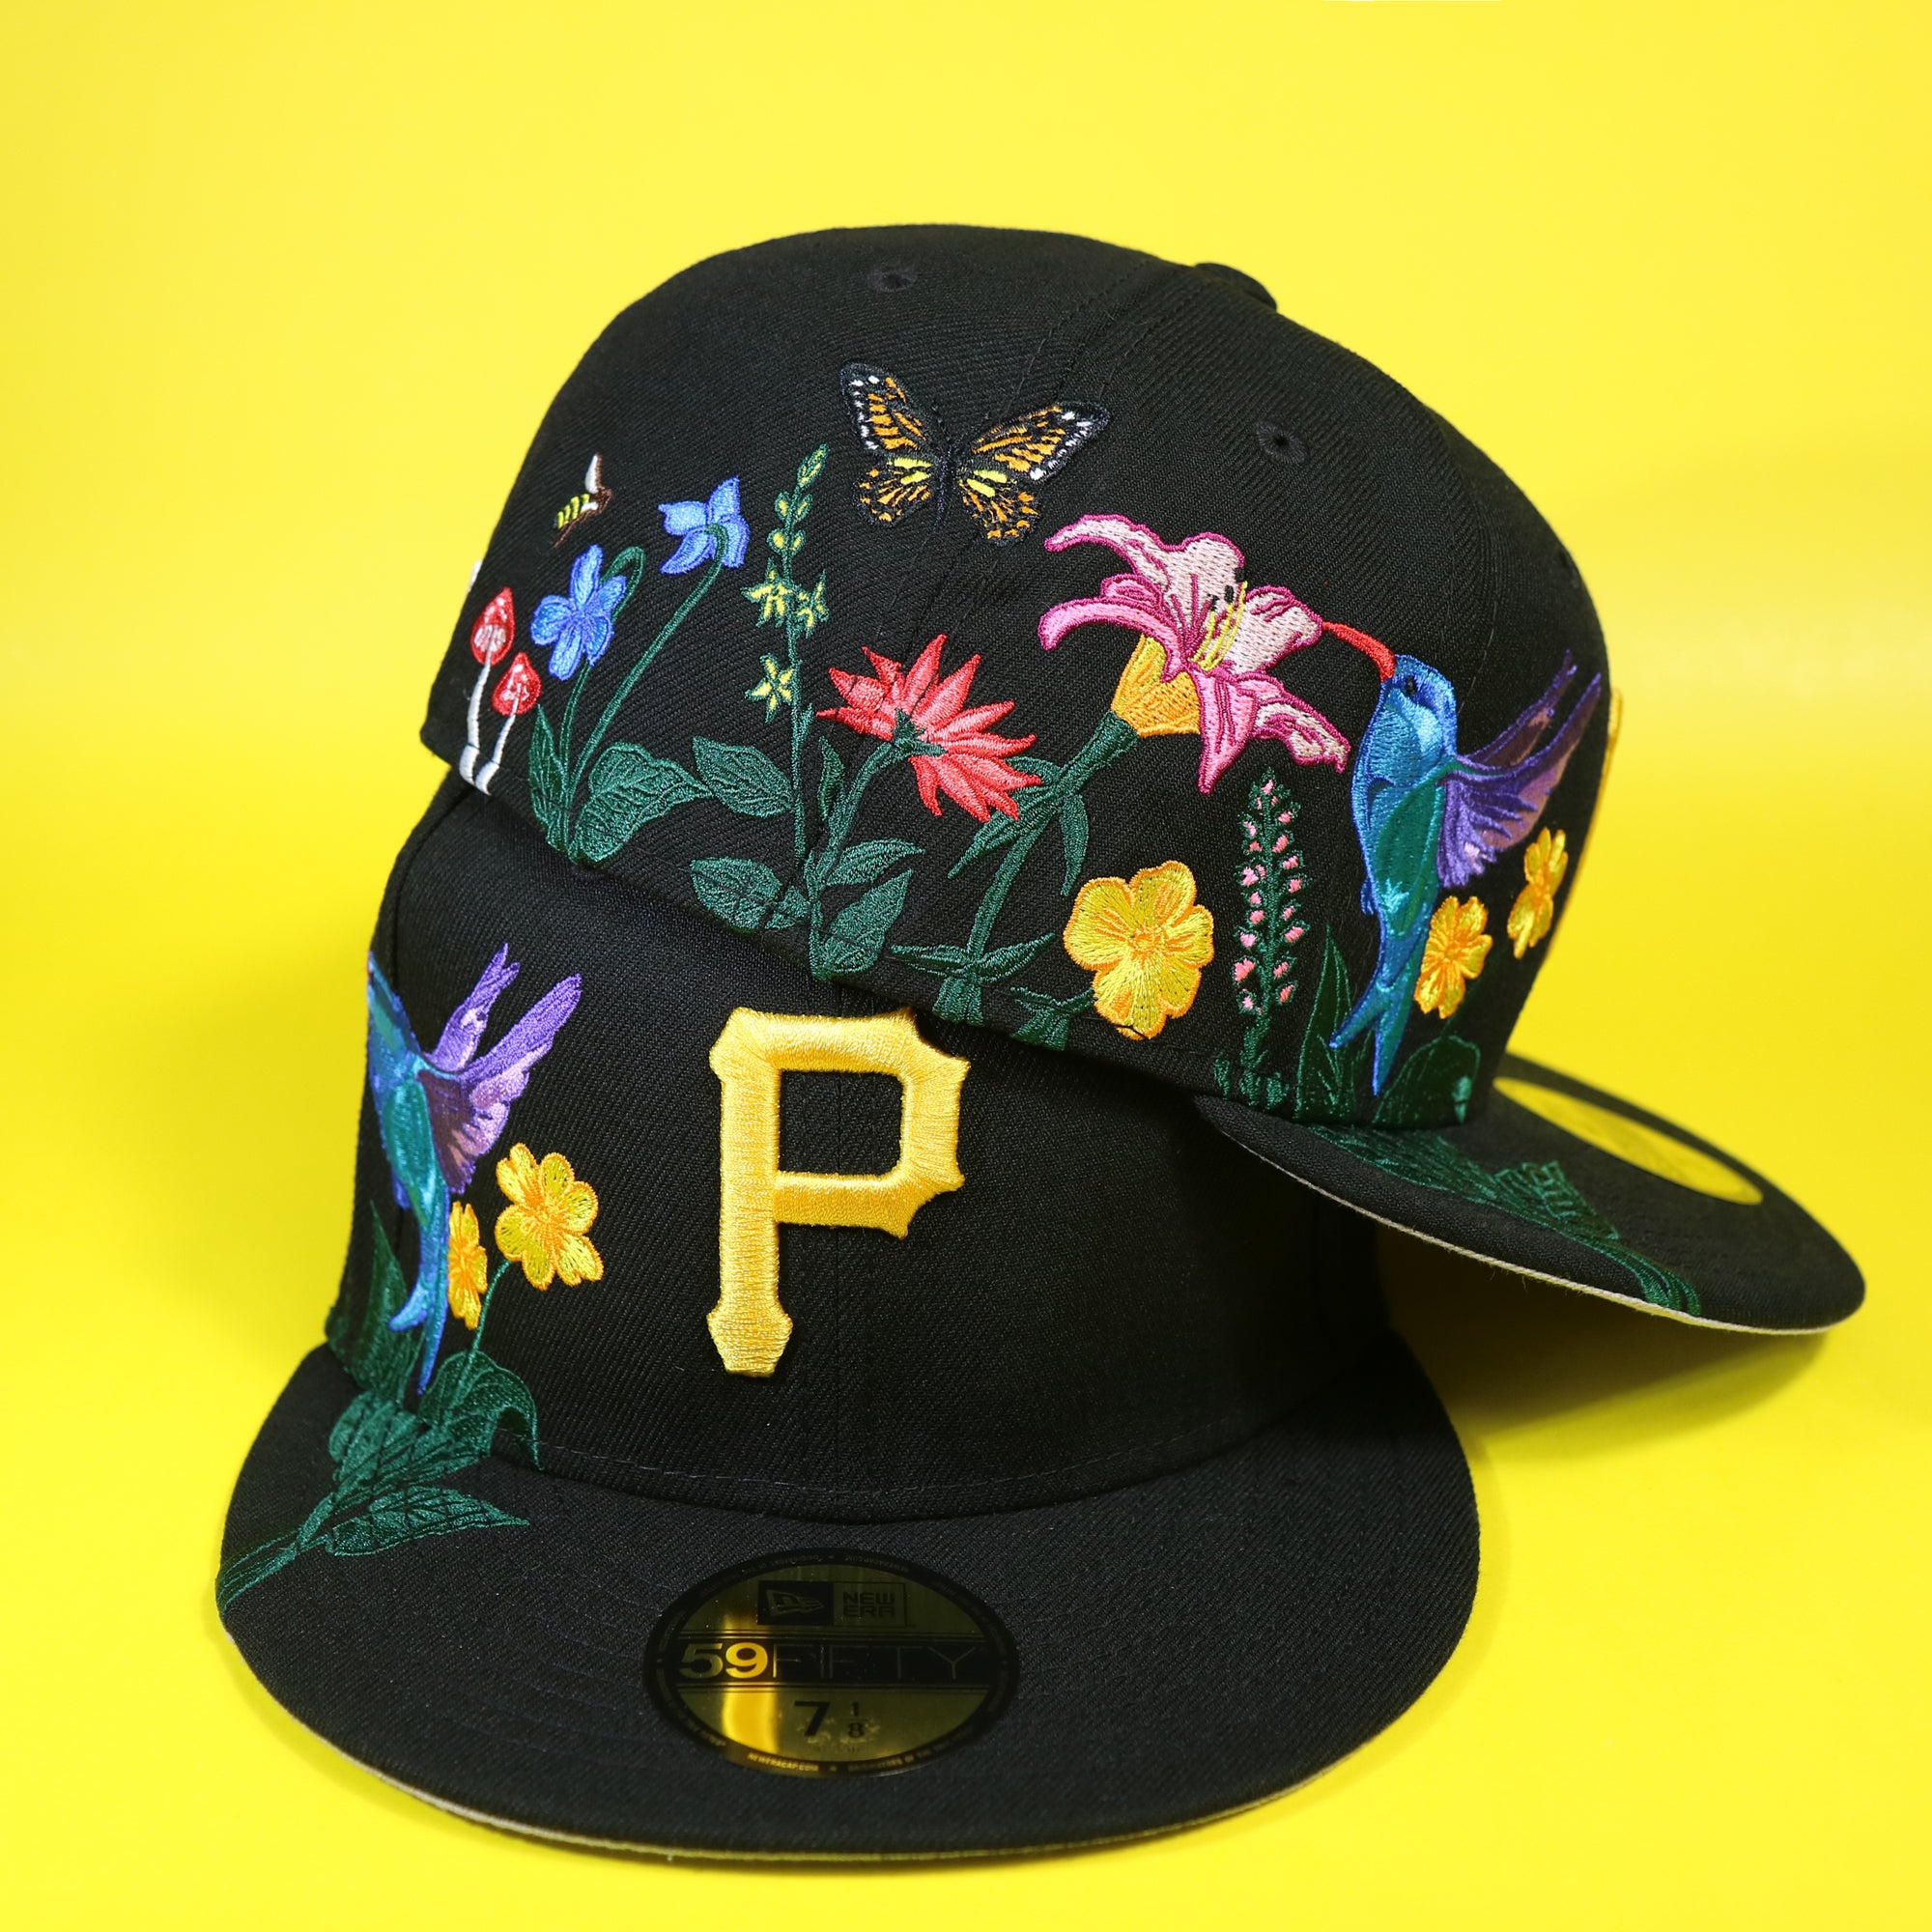 Pittsburgh Pirates New Era All Black/Gray Bottom With Blooming